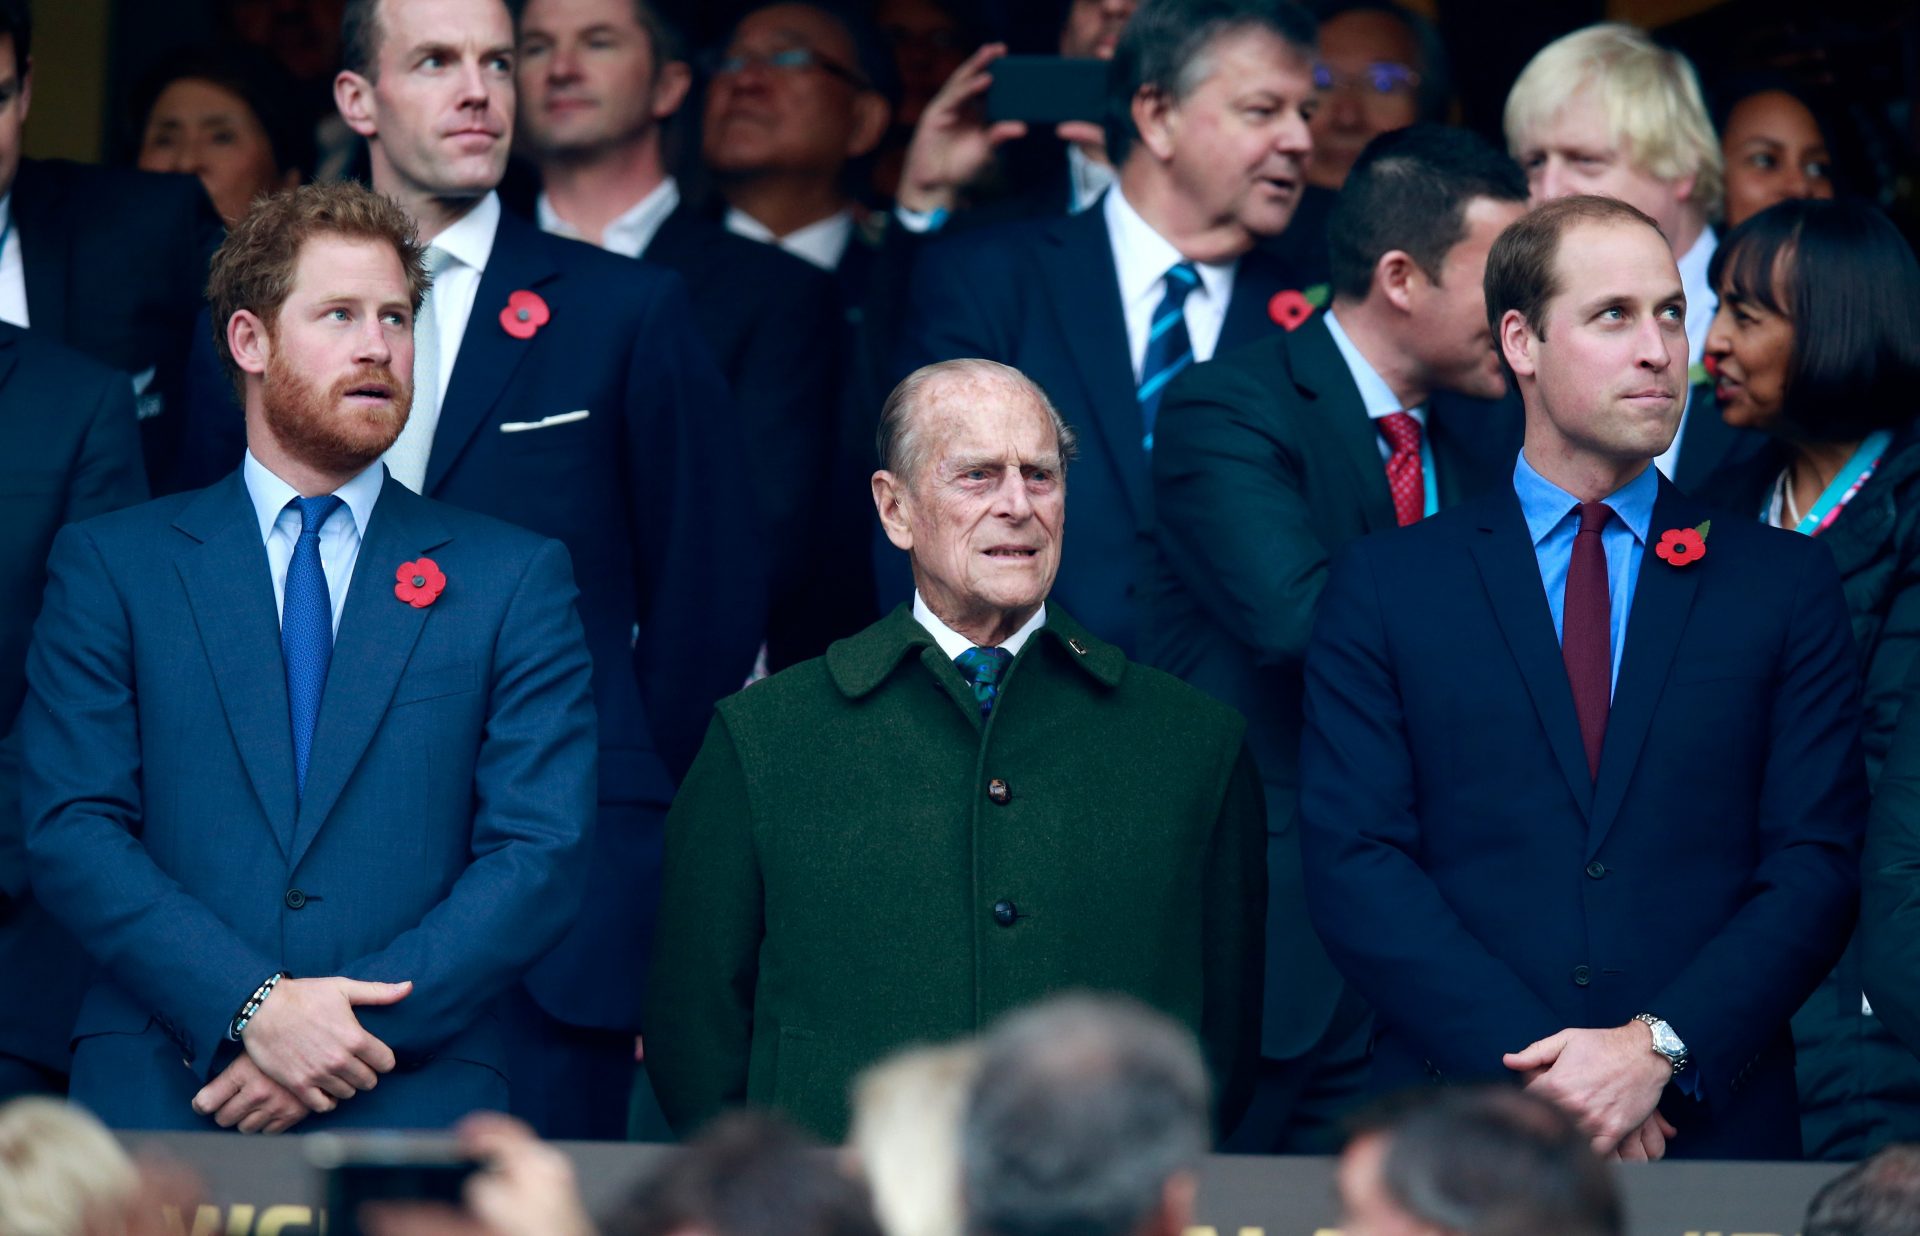 Prince Harry Will Return Home for Prince Philip’s Funeral, But Without Meghan Markle